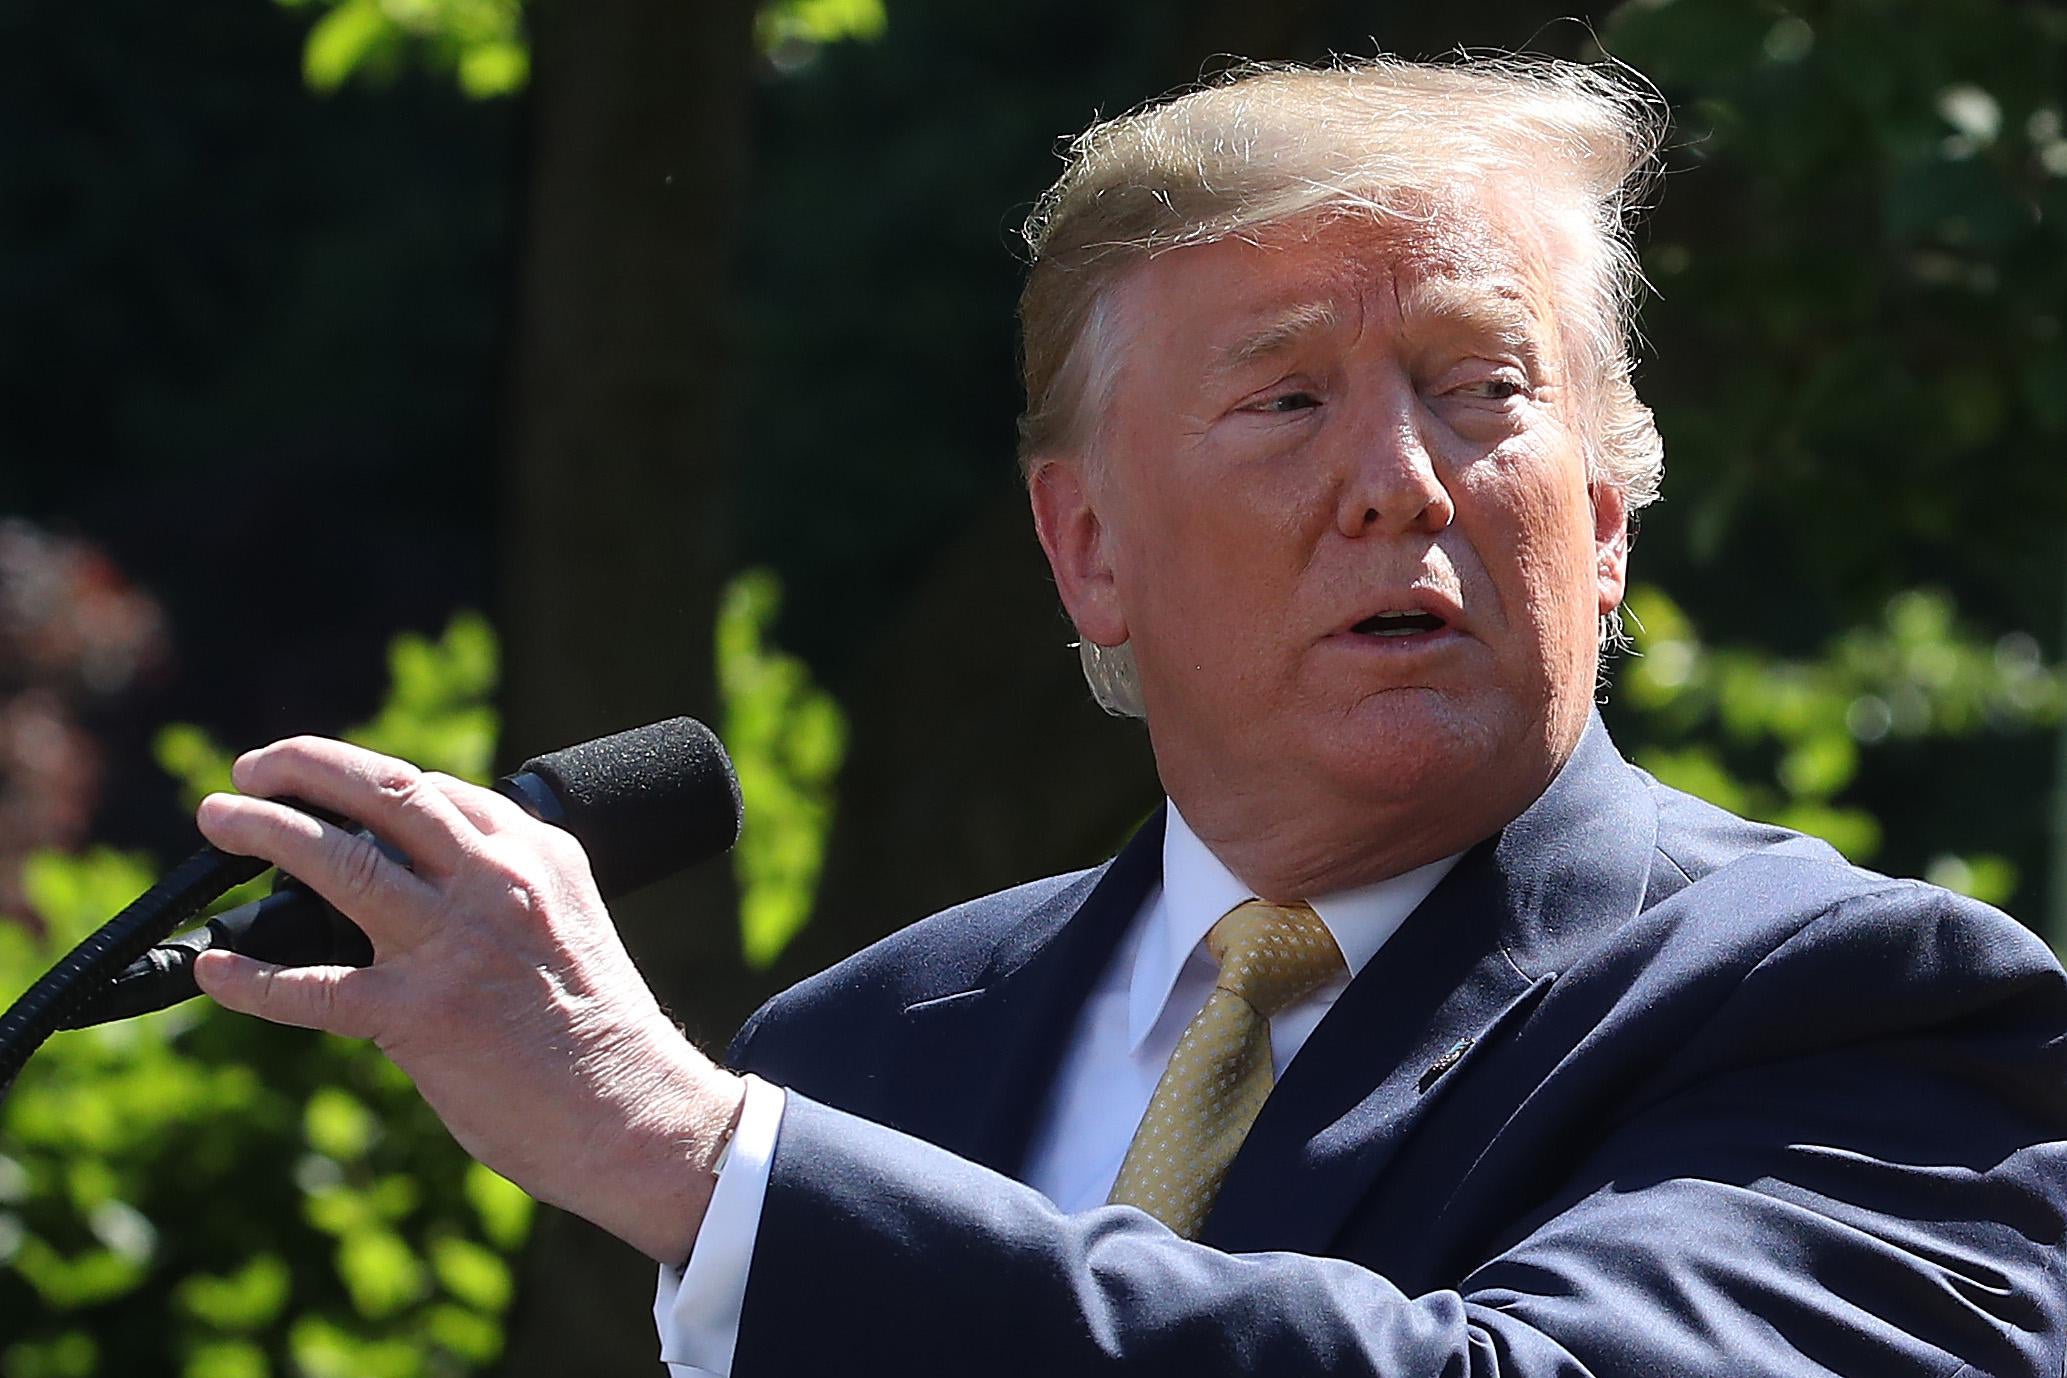 President Donald Trump speaks about healthcare coverage at the White House on June 14, 2019 in Washington, D.C.